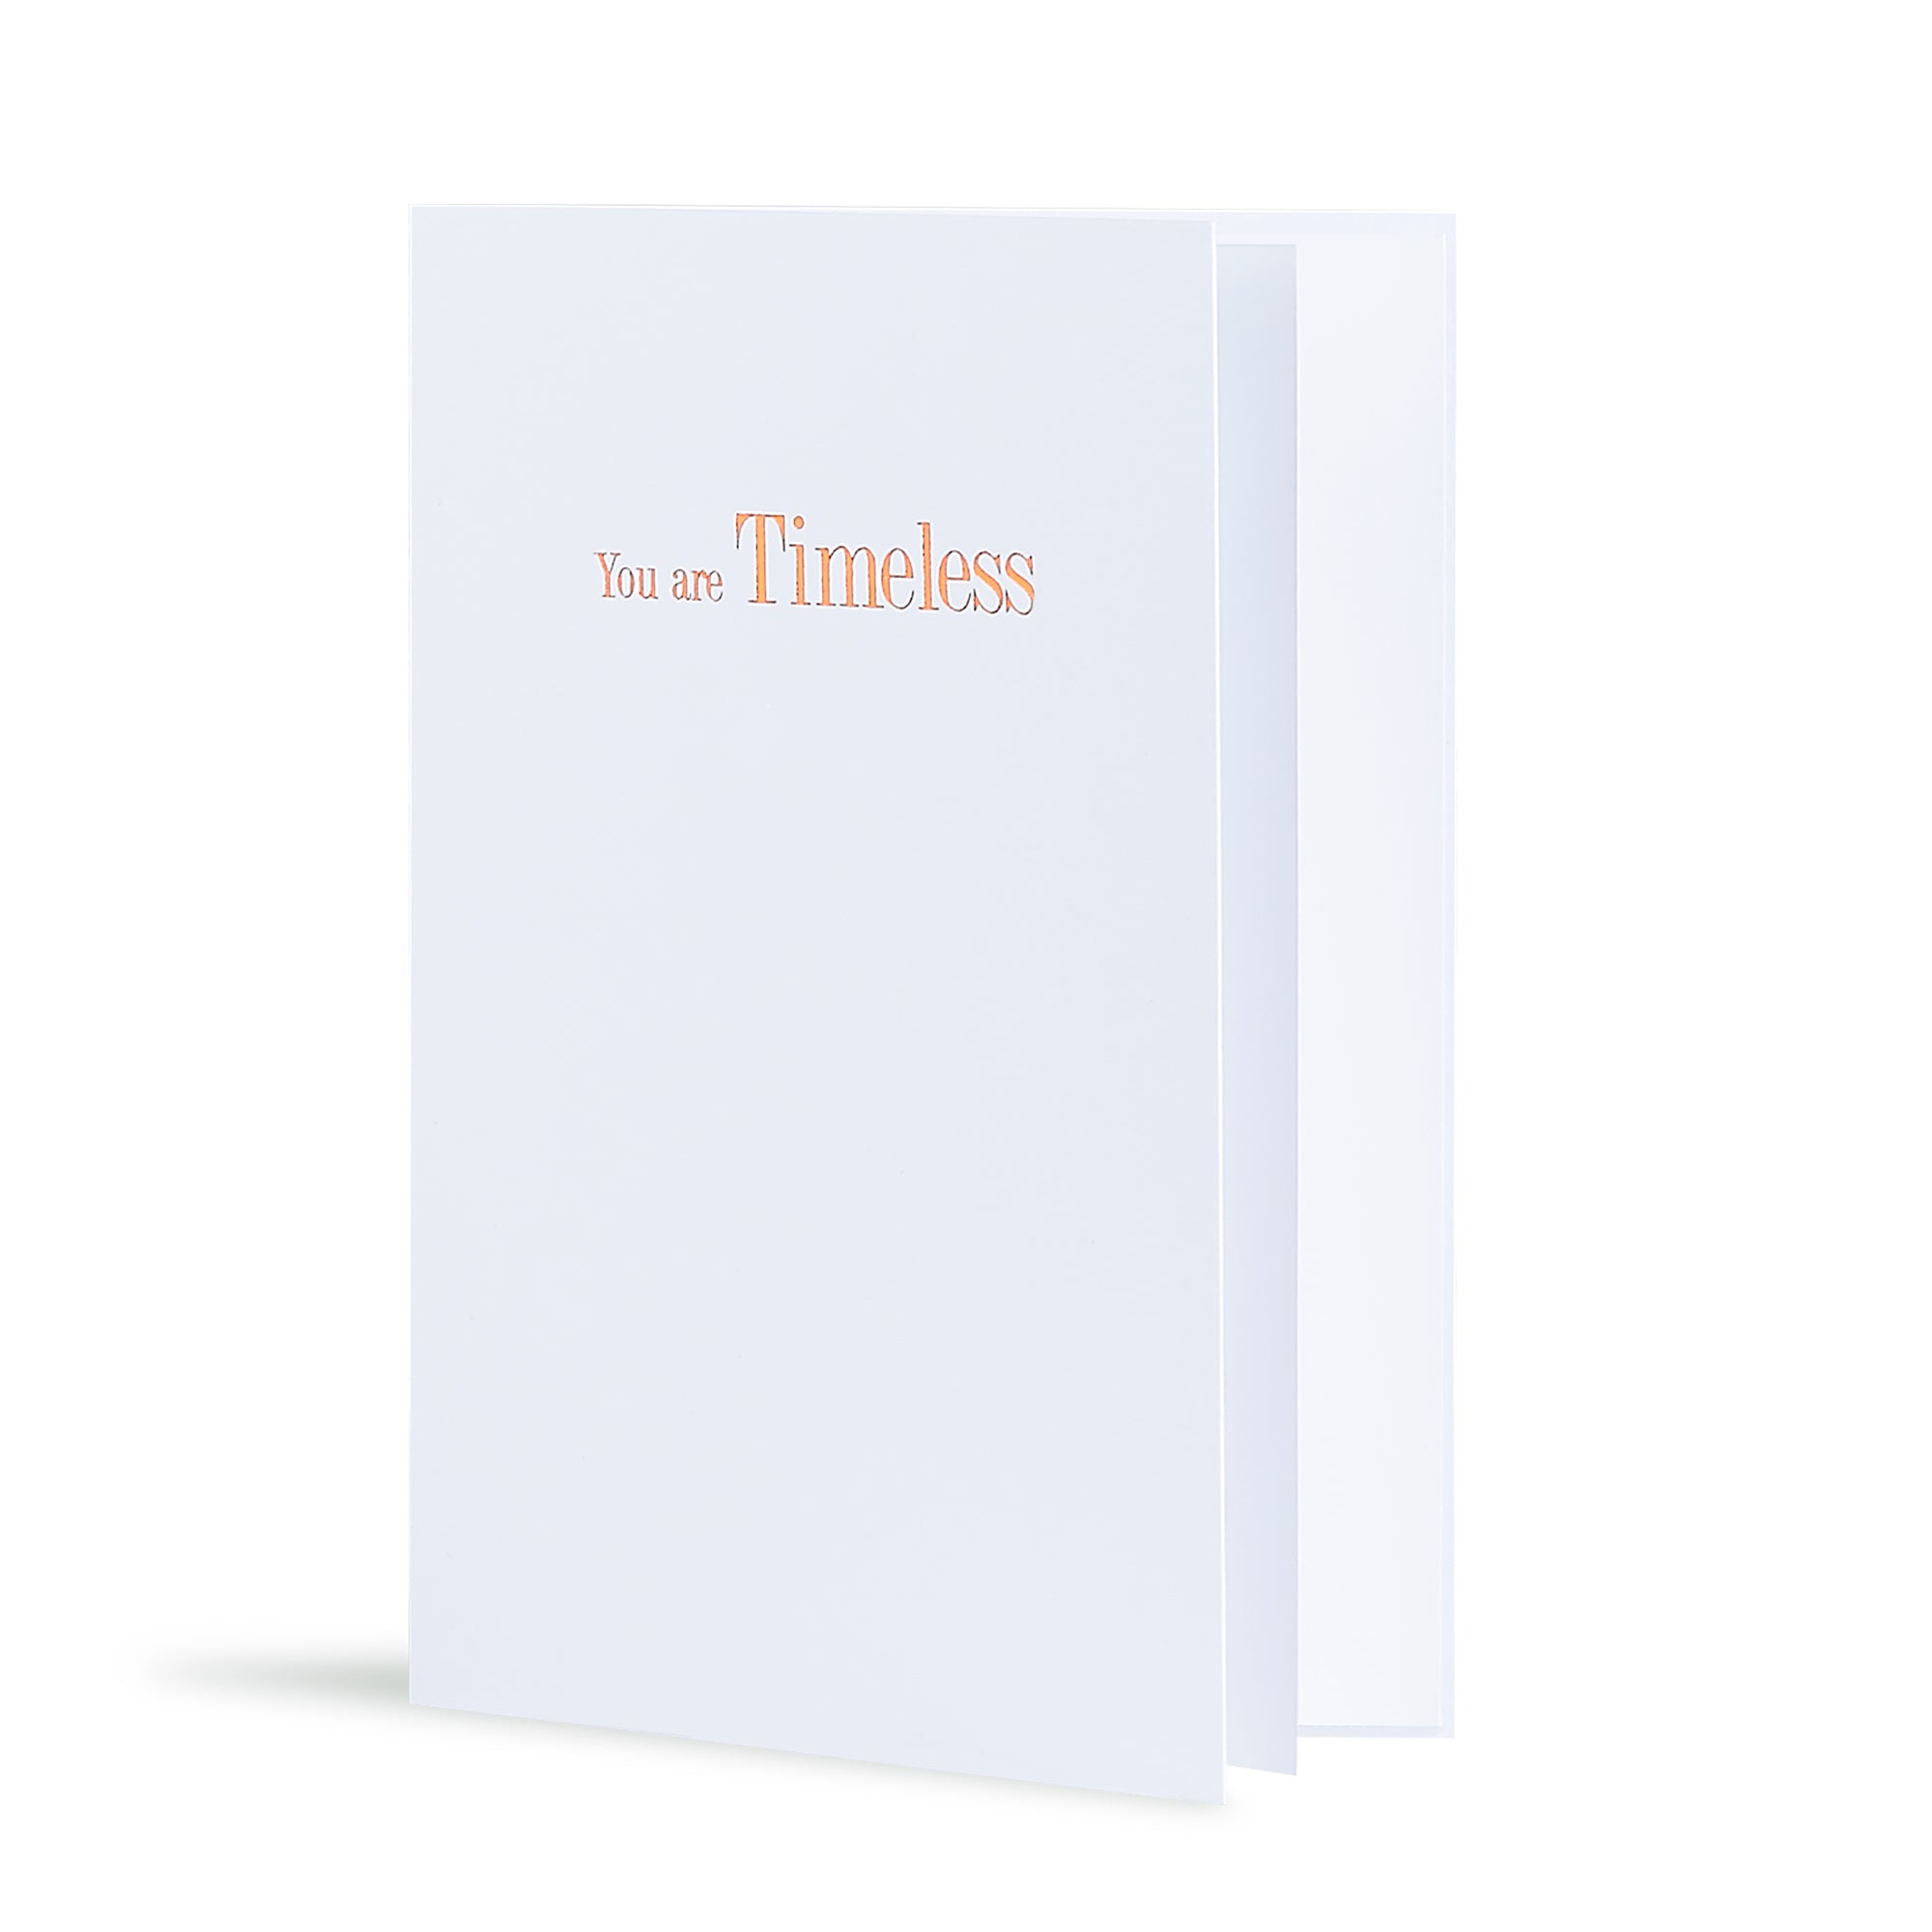 You Are Timeless Greeting Card in White, Side